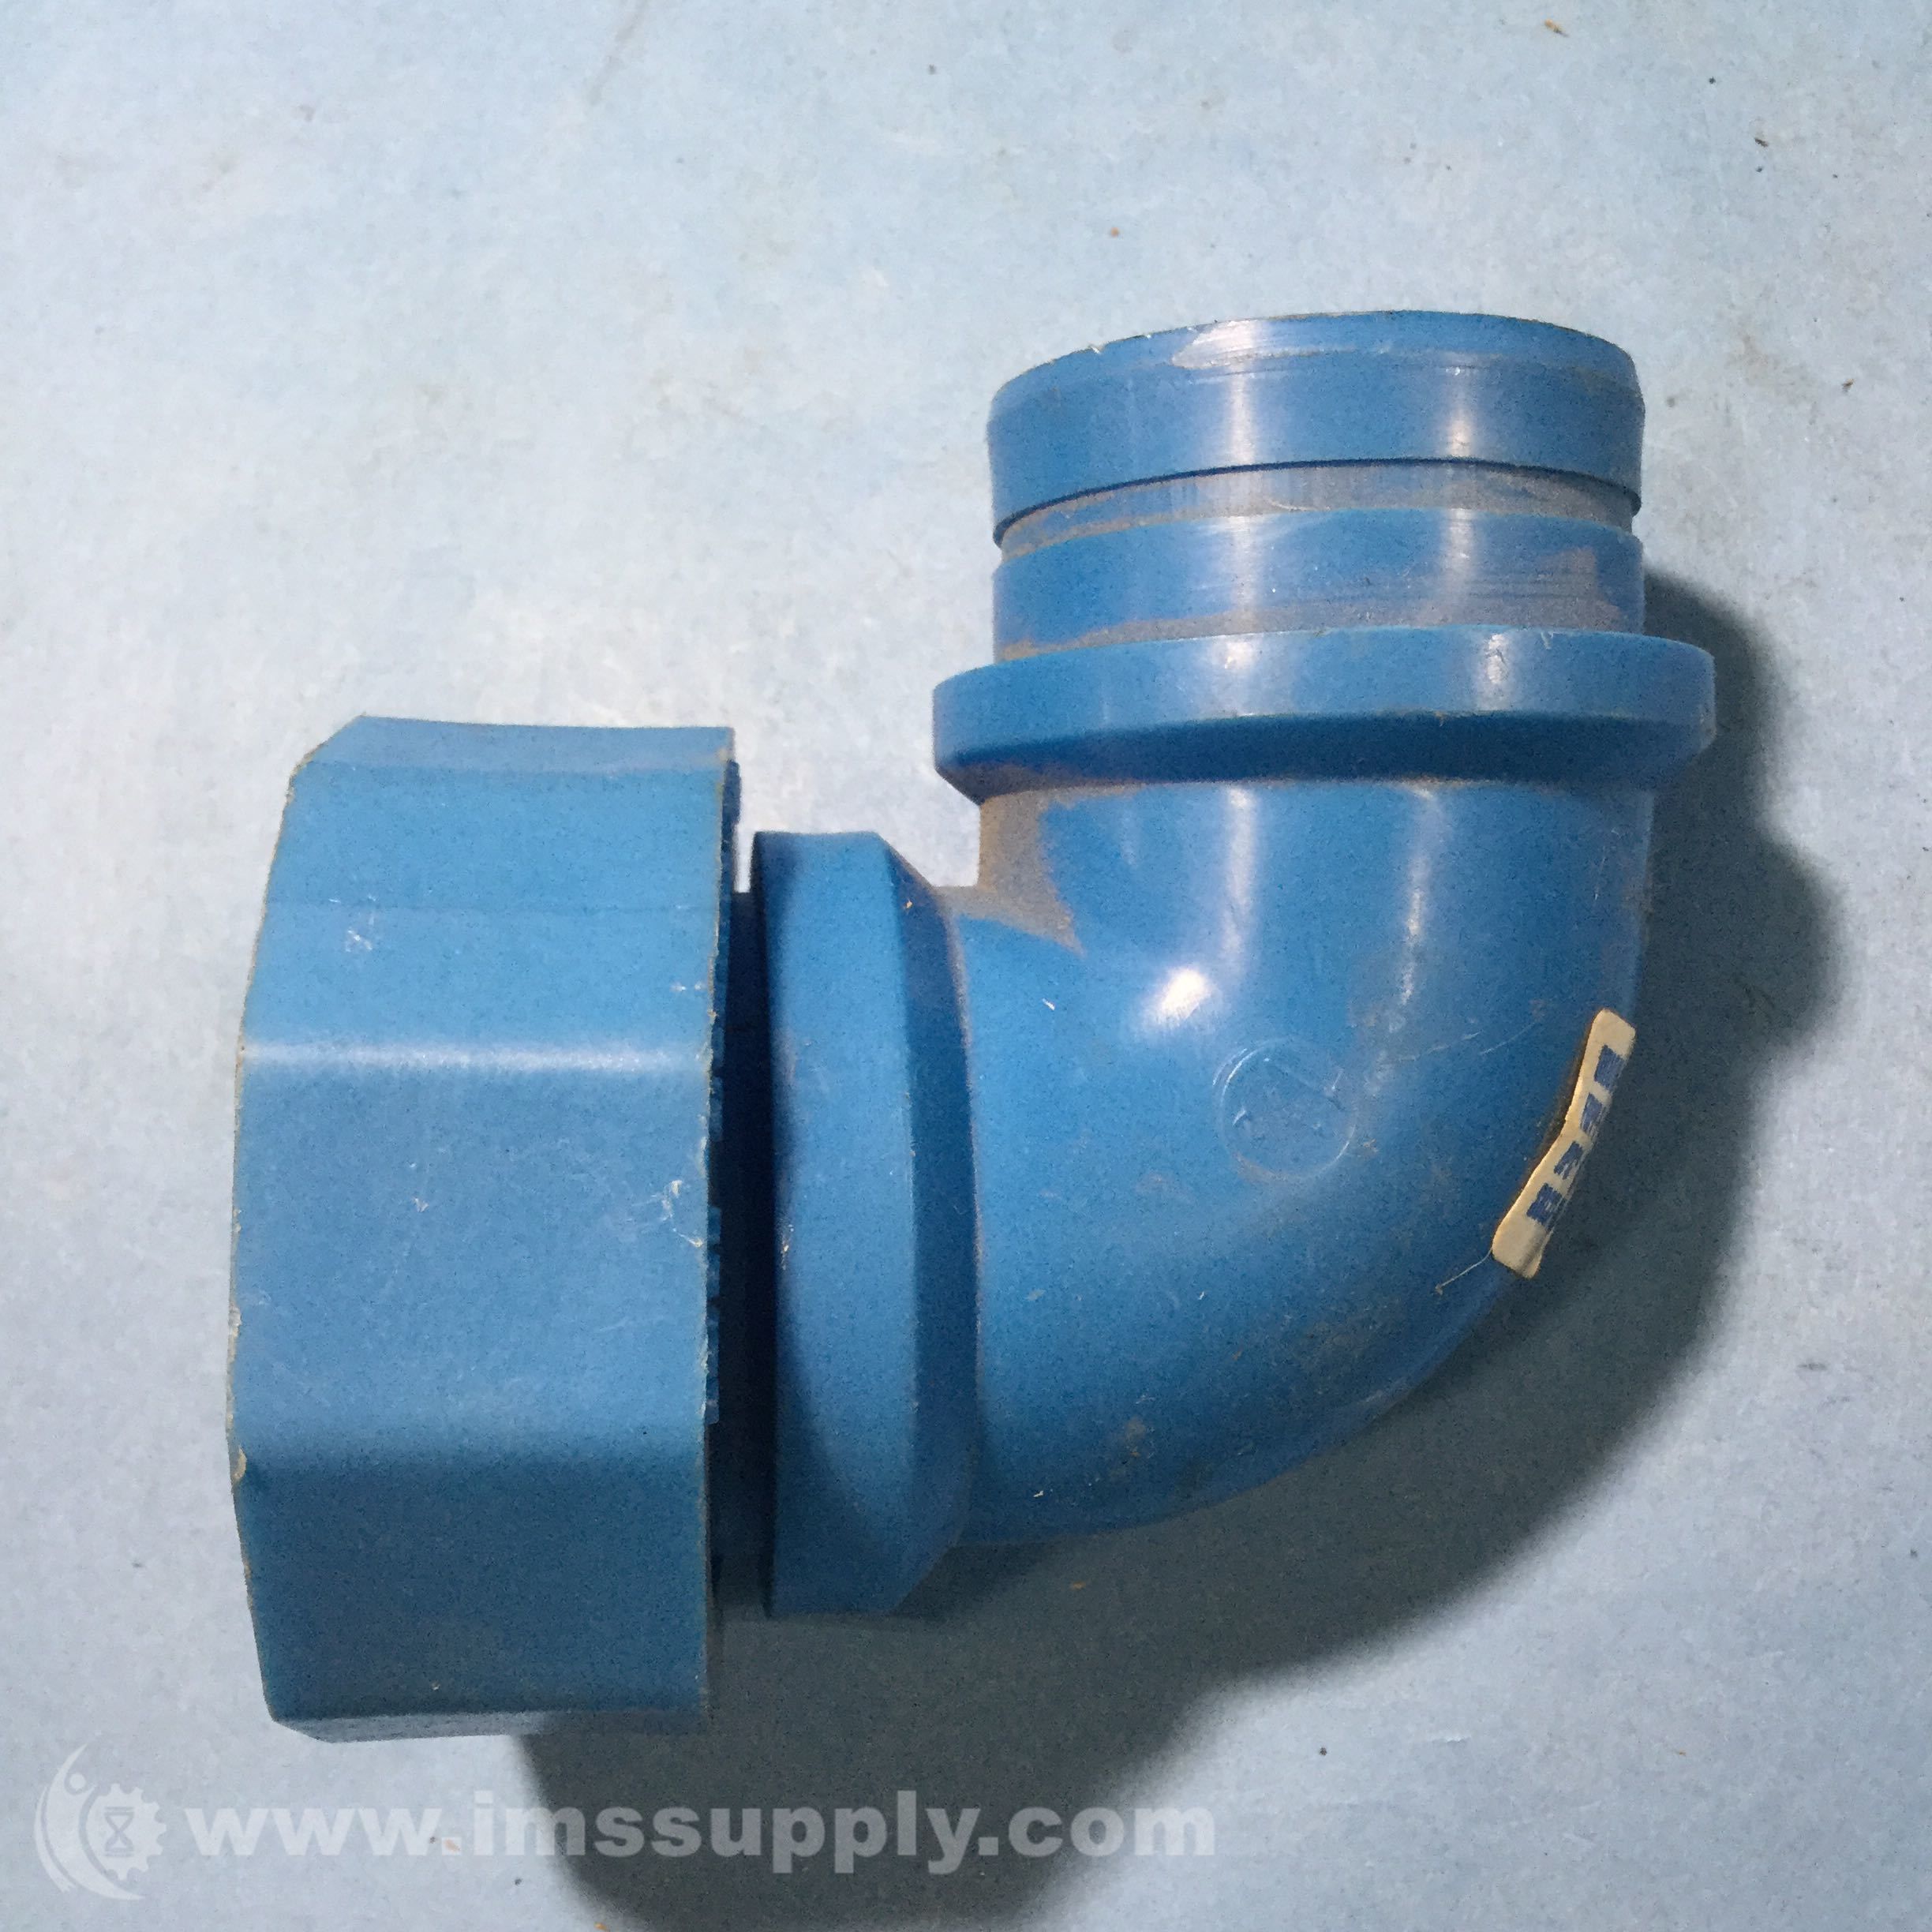 Orion Fittings frpp-f-1412 - IMS Supply